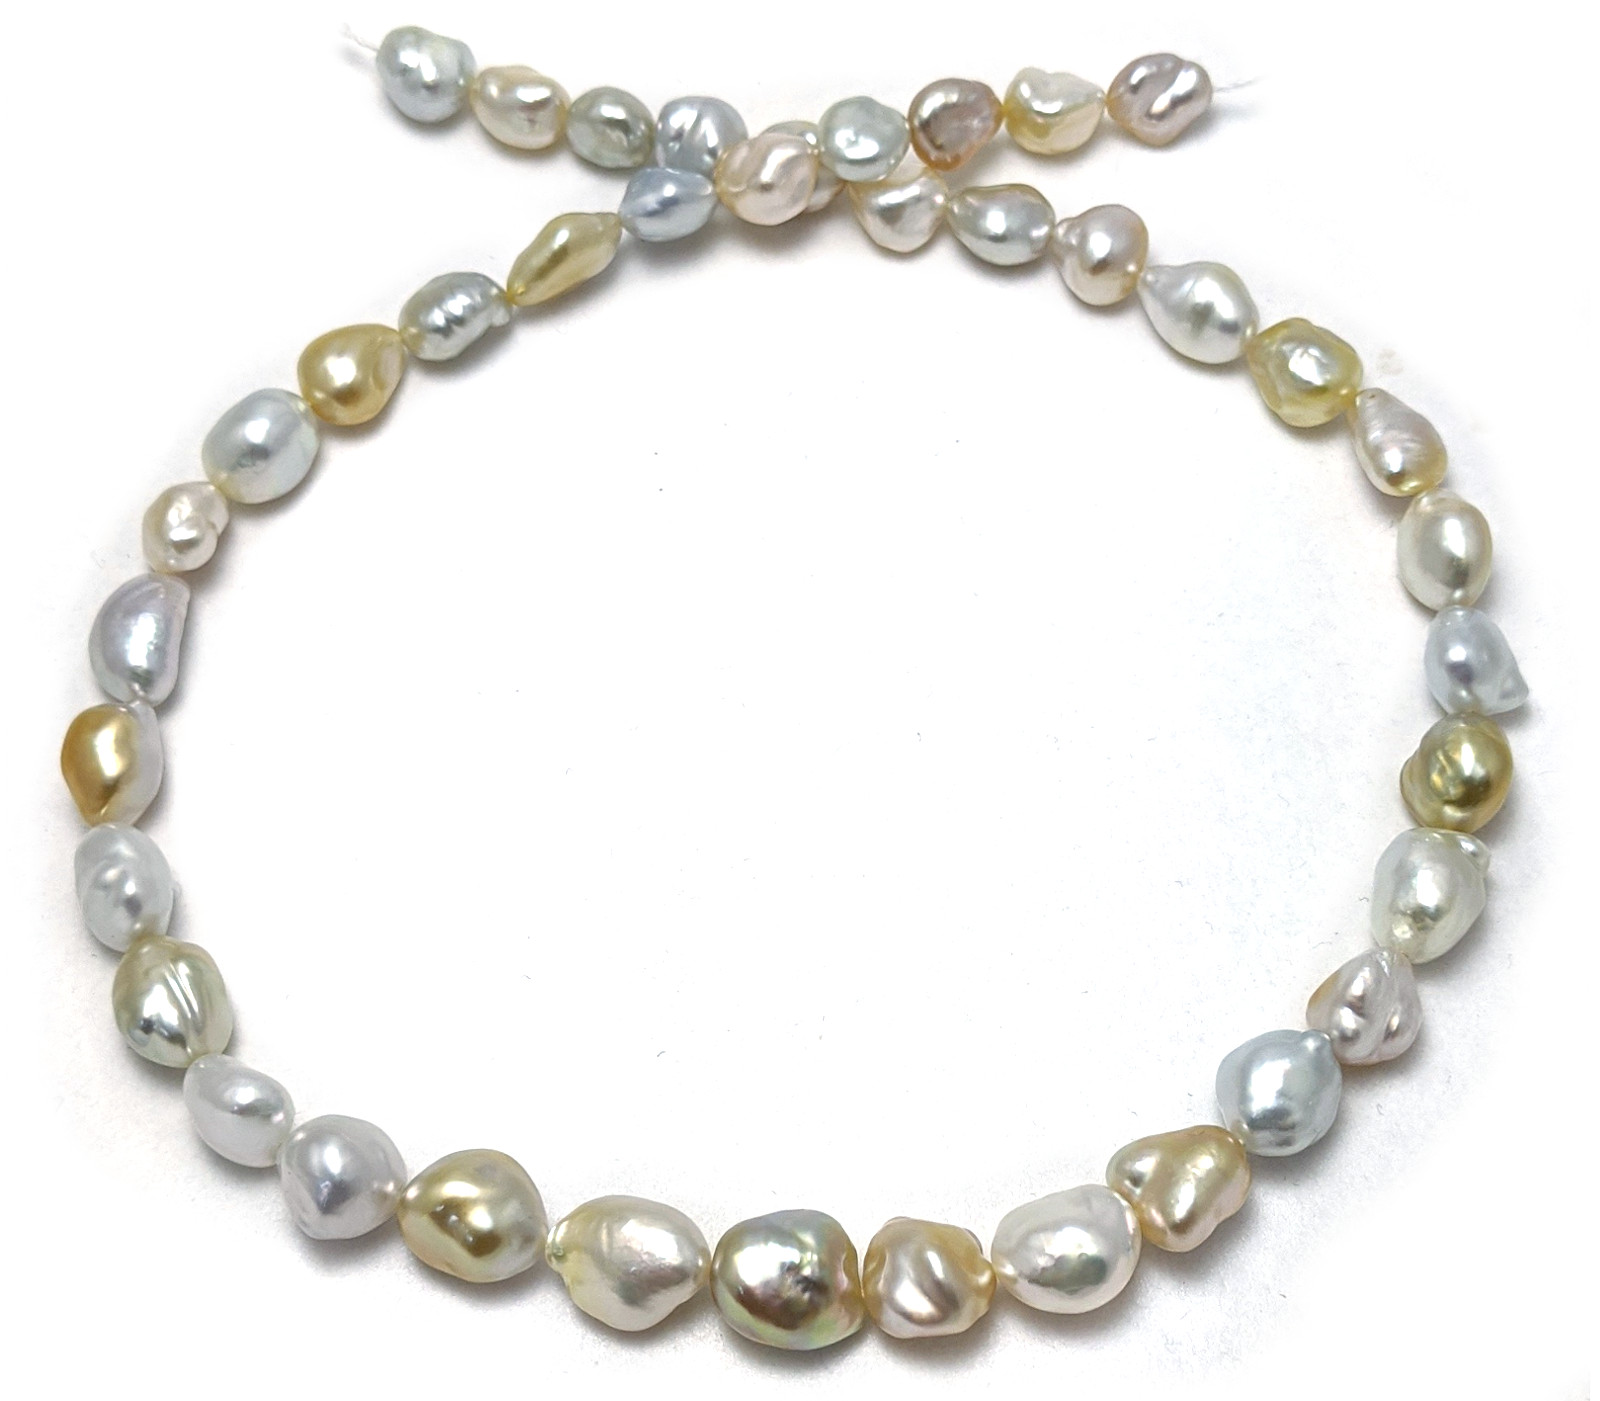 Keshi White and Golden South Sea Pearl Necklace with Freeform